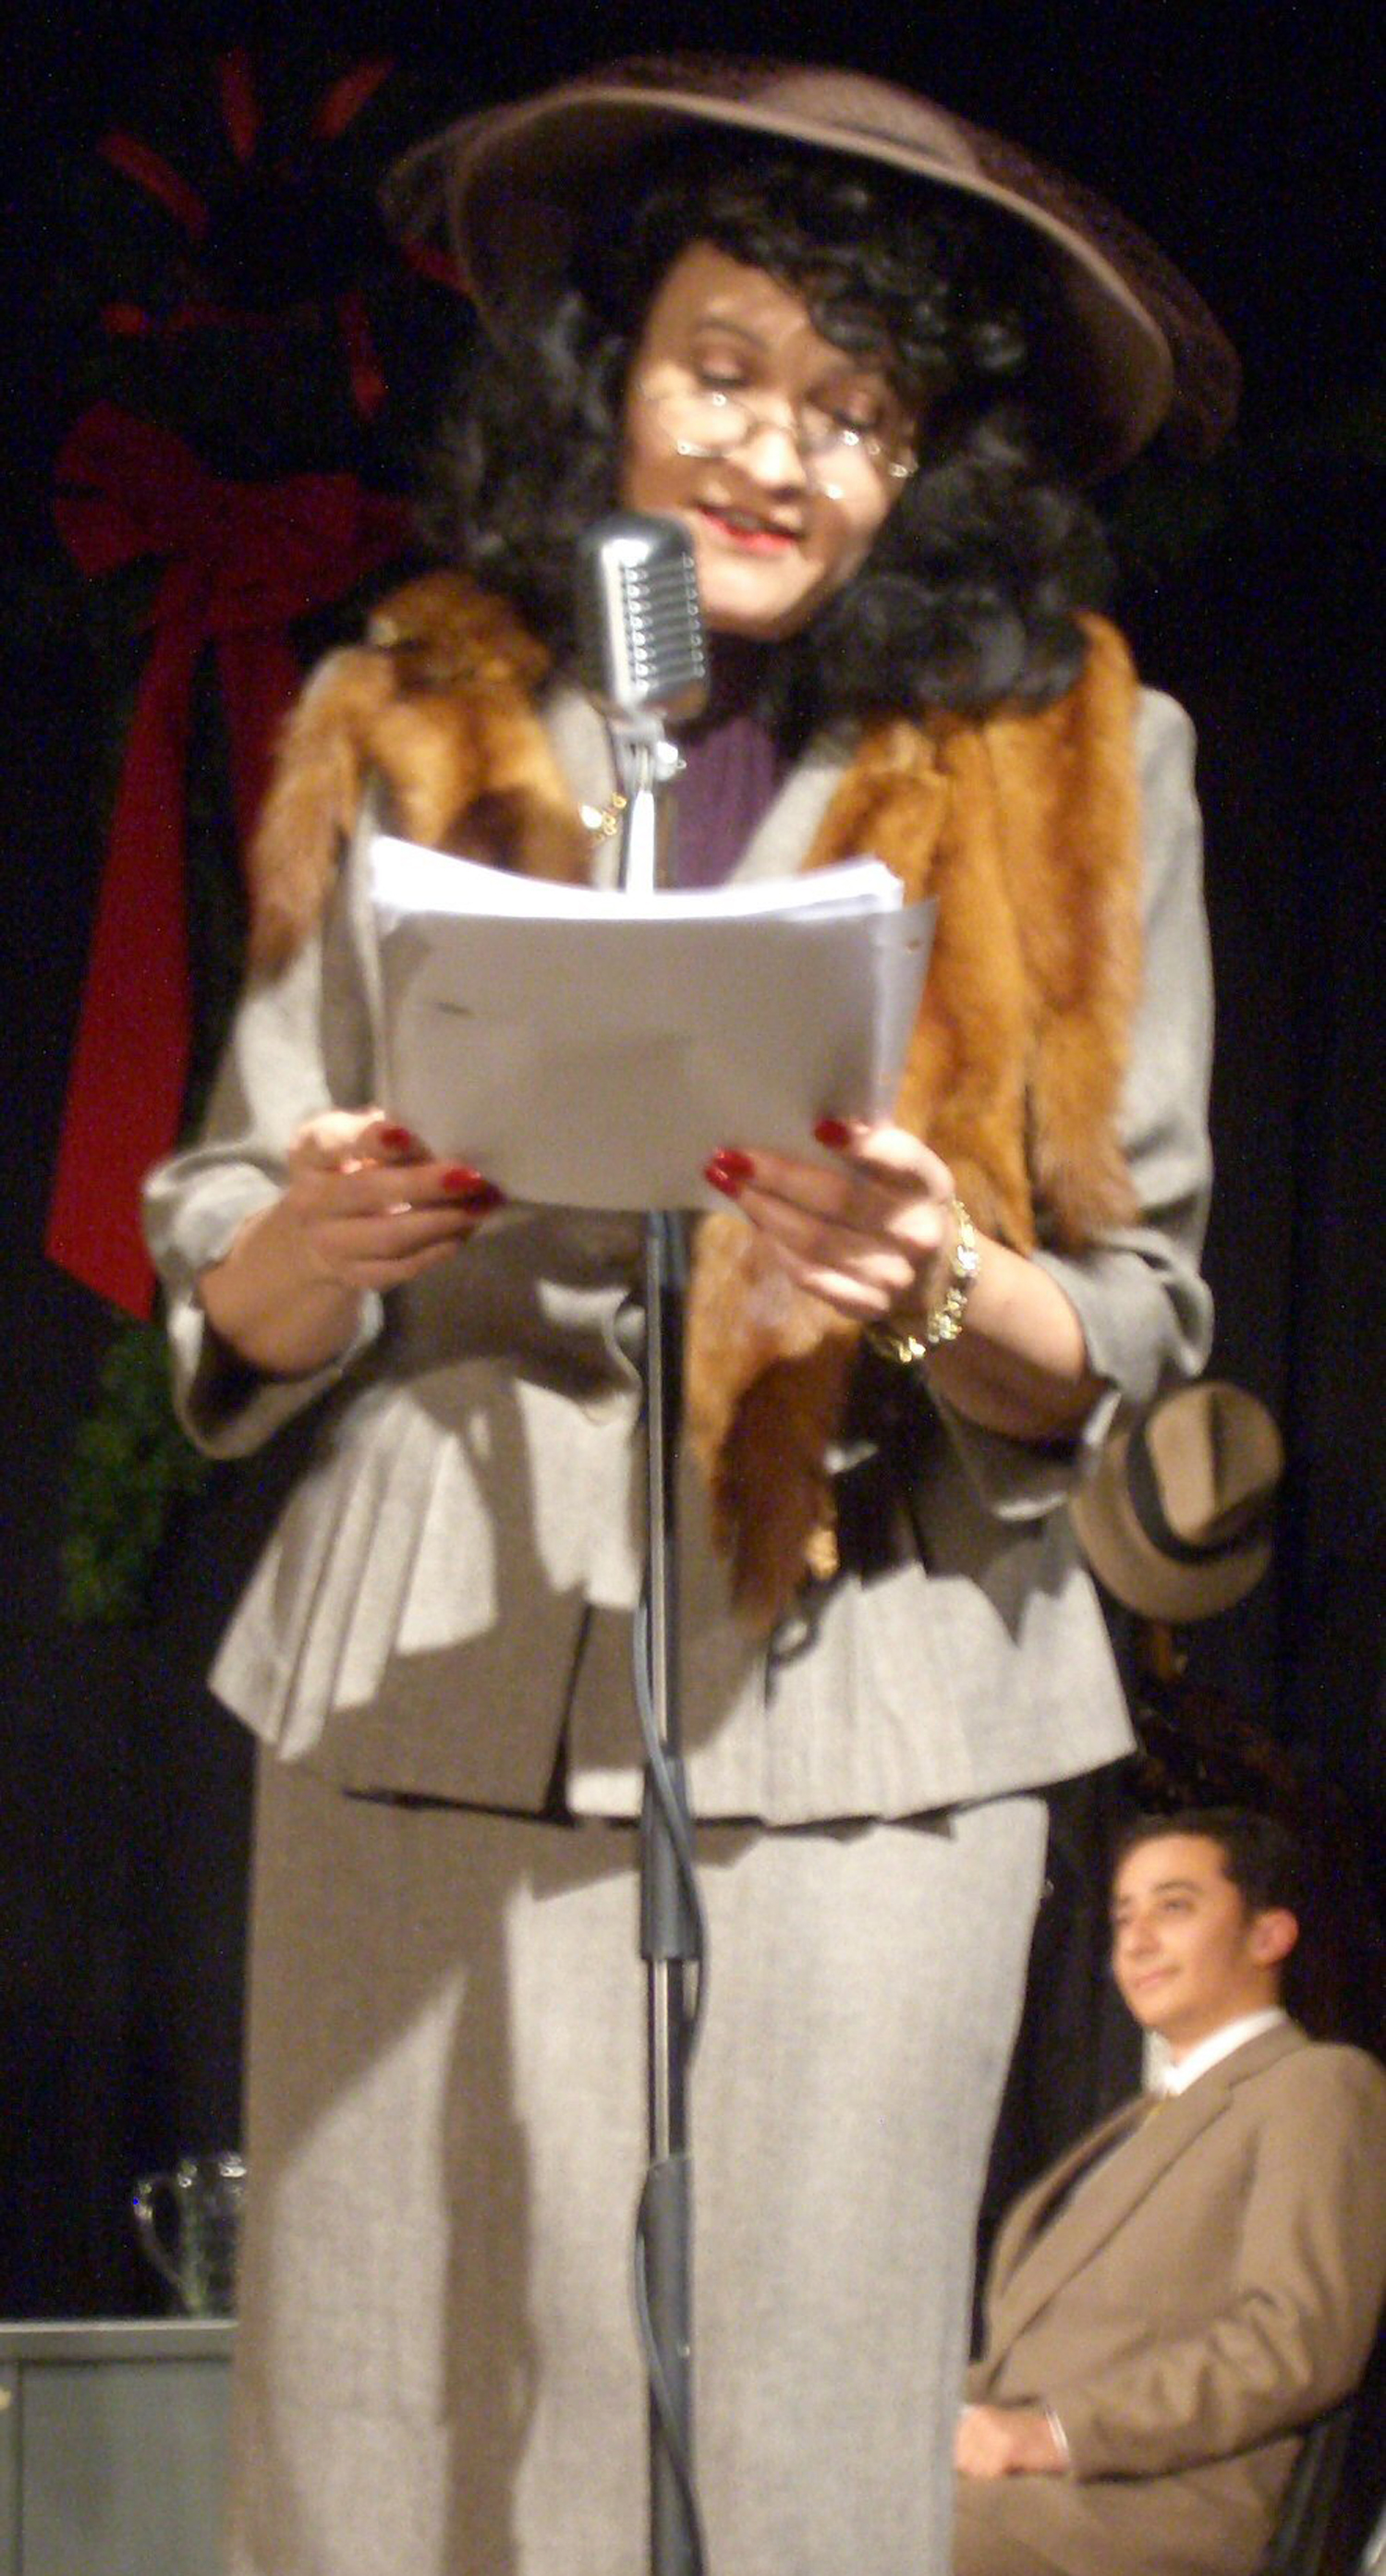 as Rose Bailey, with Daniel Khalil, in It's A Wonderful Life: A Live Radio Play - Pasadena, California 2008